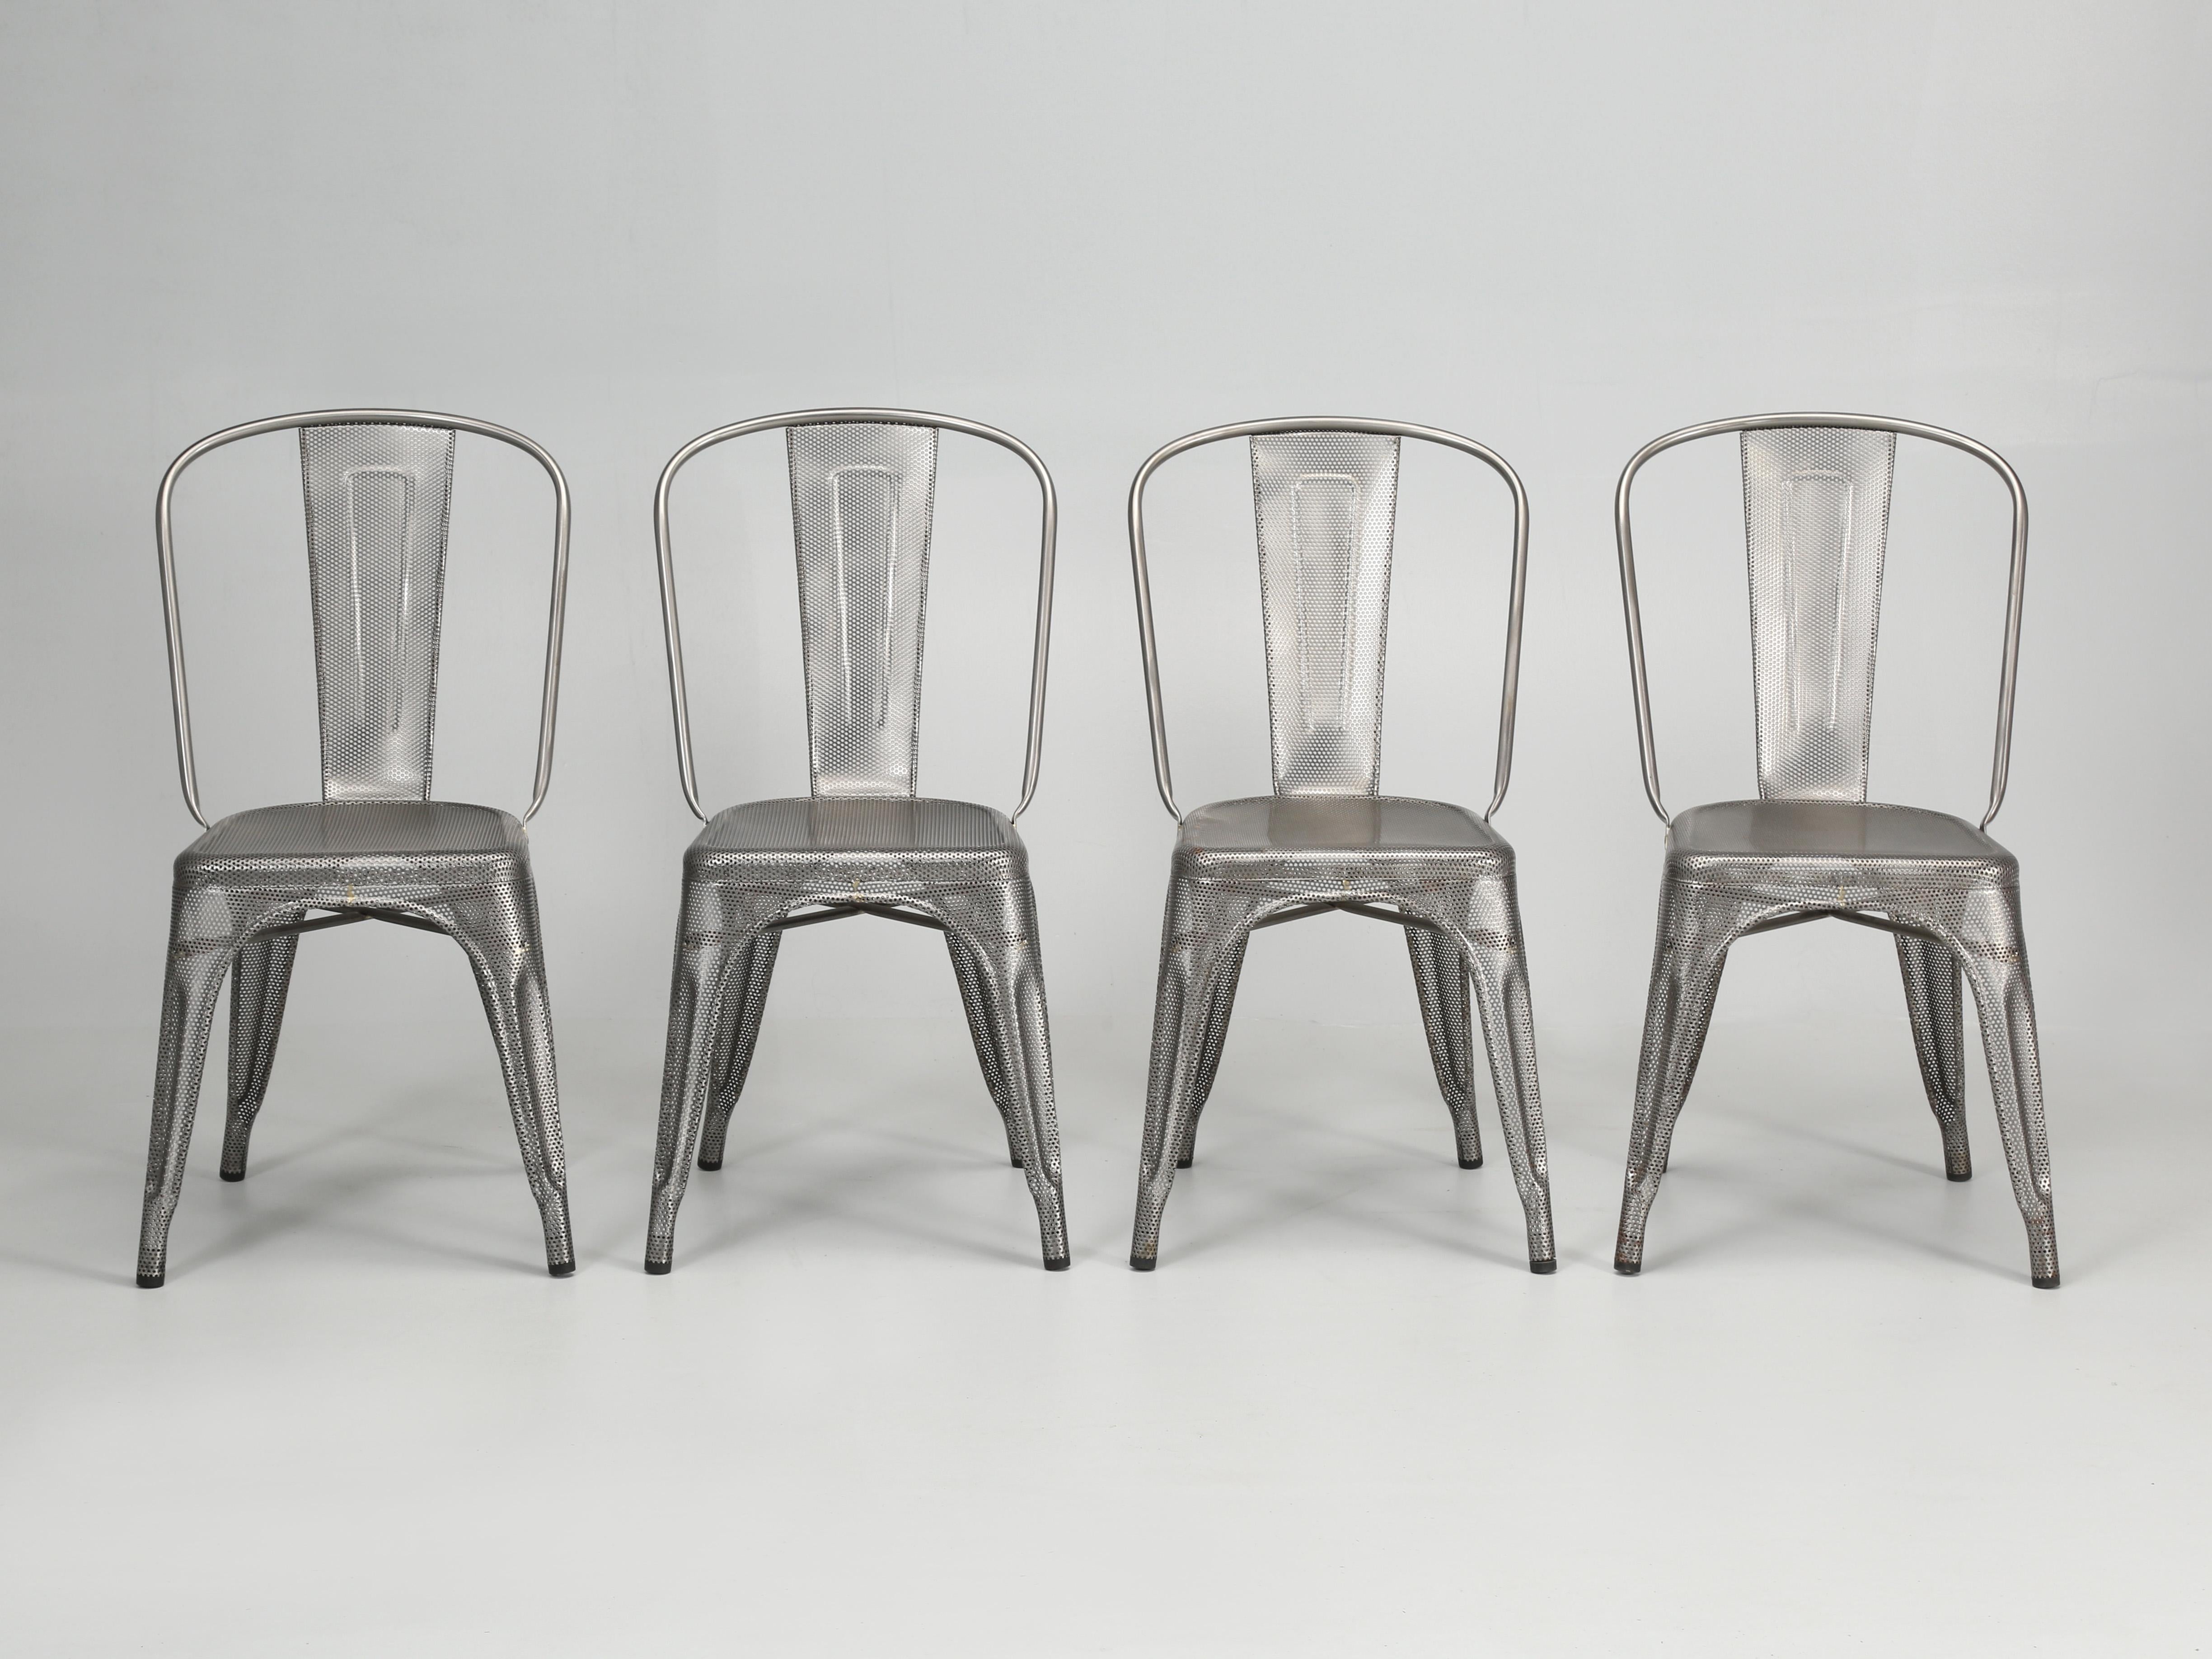 Genuine Hand-Made in France Tolix Wire Mesh steel stacking chairs, set of (4) available. These were showroom samples and then stored in a warehouse and are not flawless. Two chairs are in near perfect condition. One chair has light rust colored